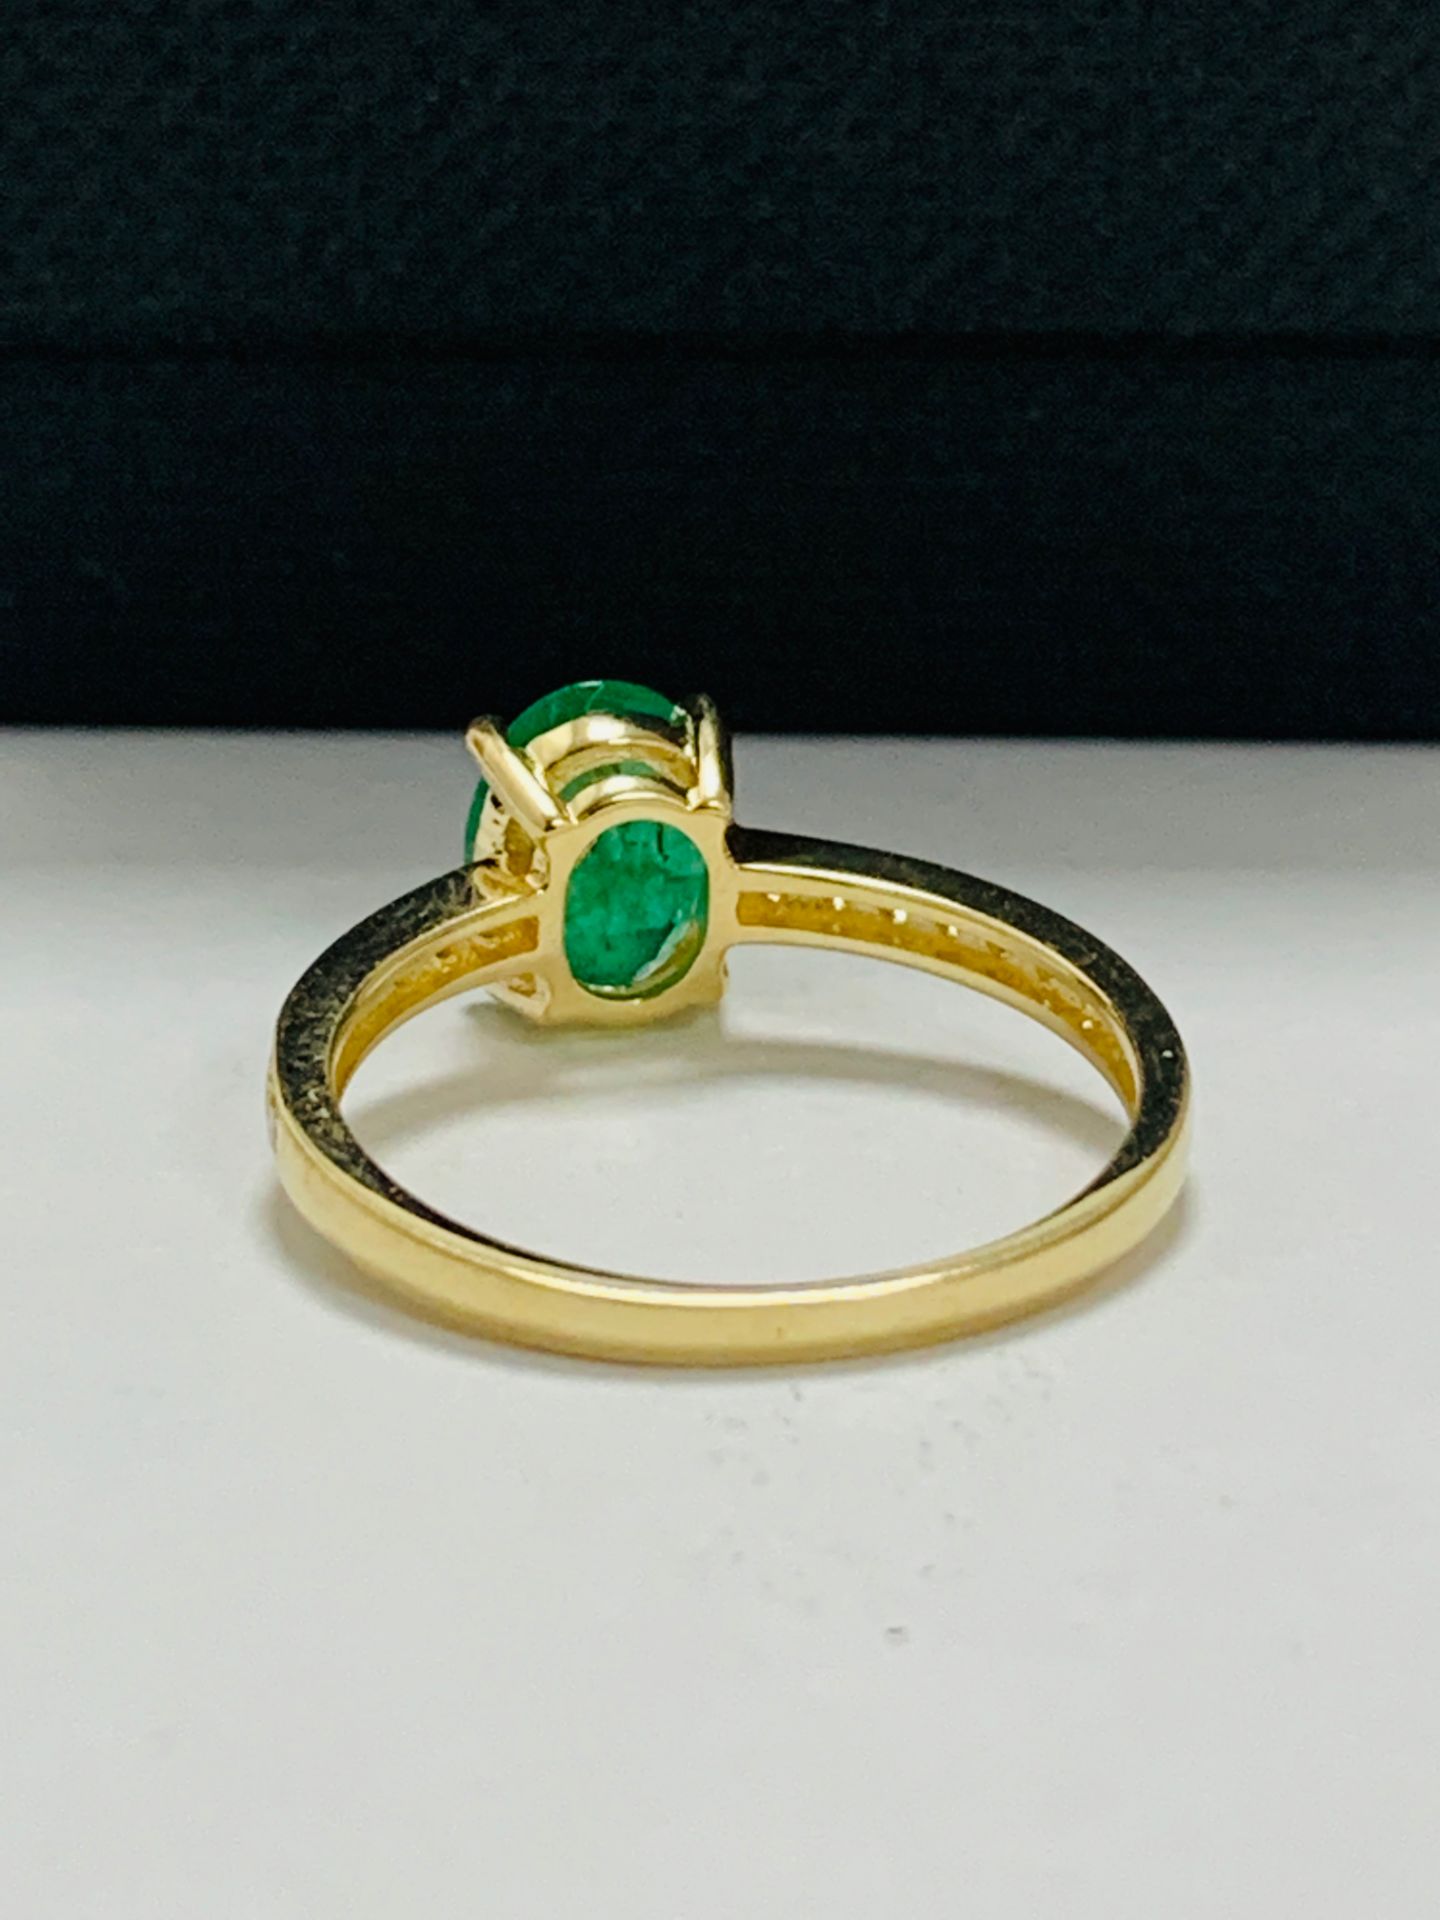 14ct yellow gold emerald and diamond ring - Image 7 of 11